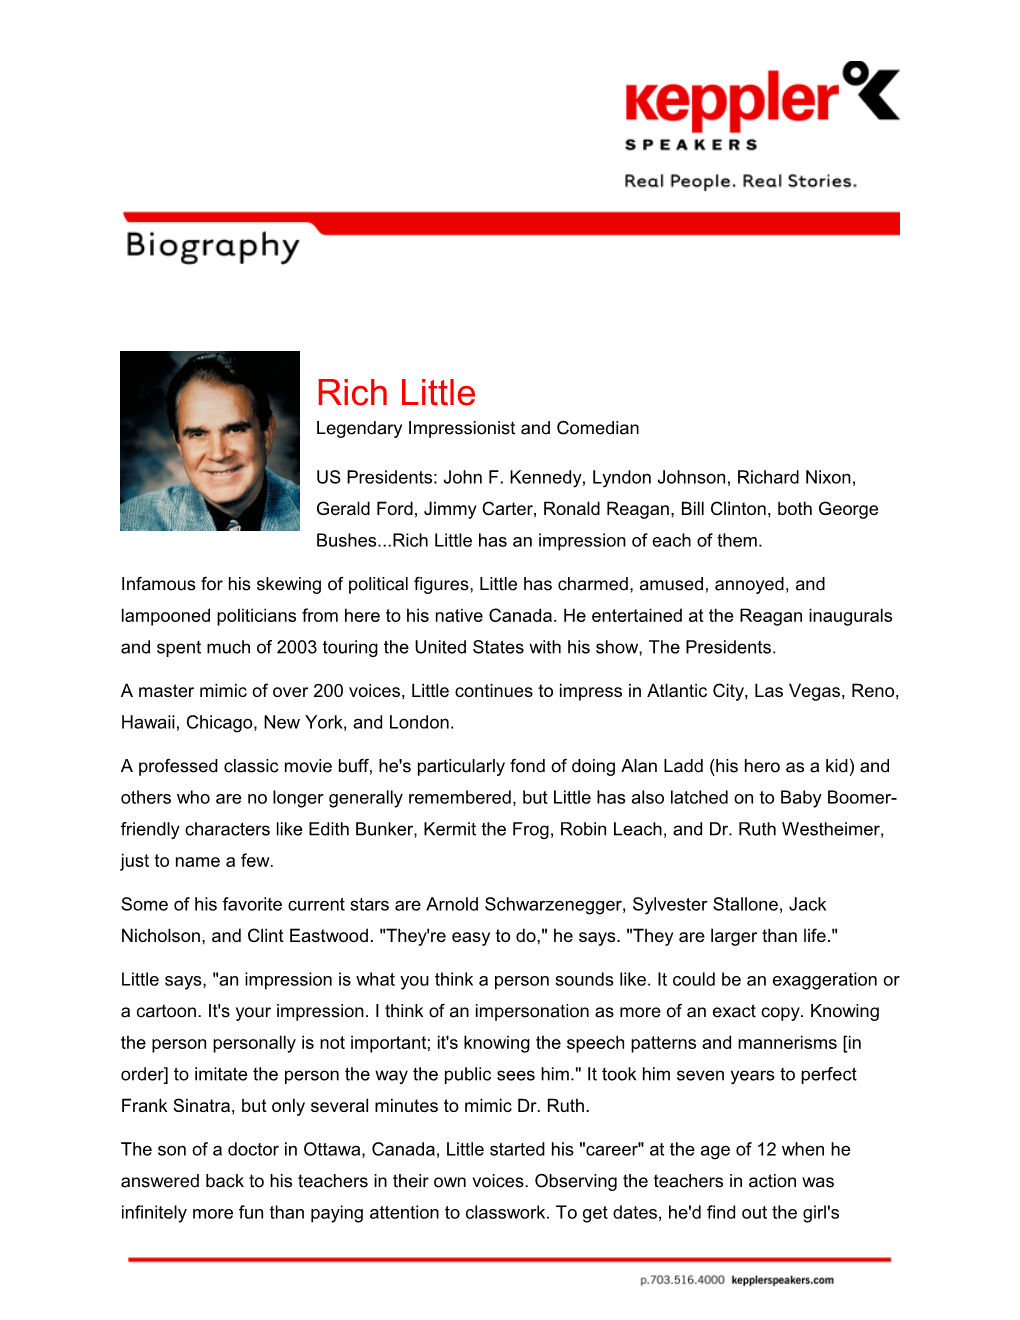 Rich Little Legendary Impressionist and Comedian